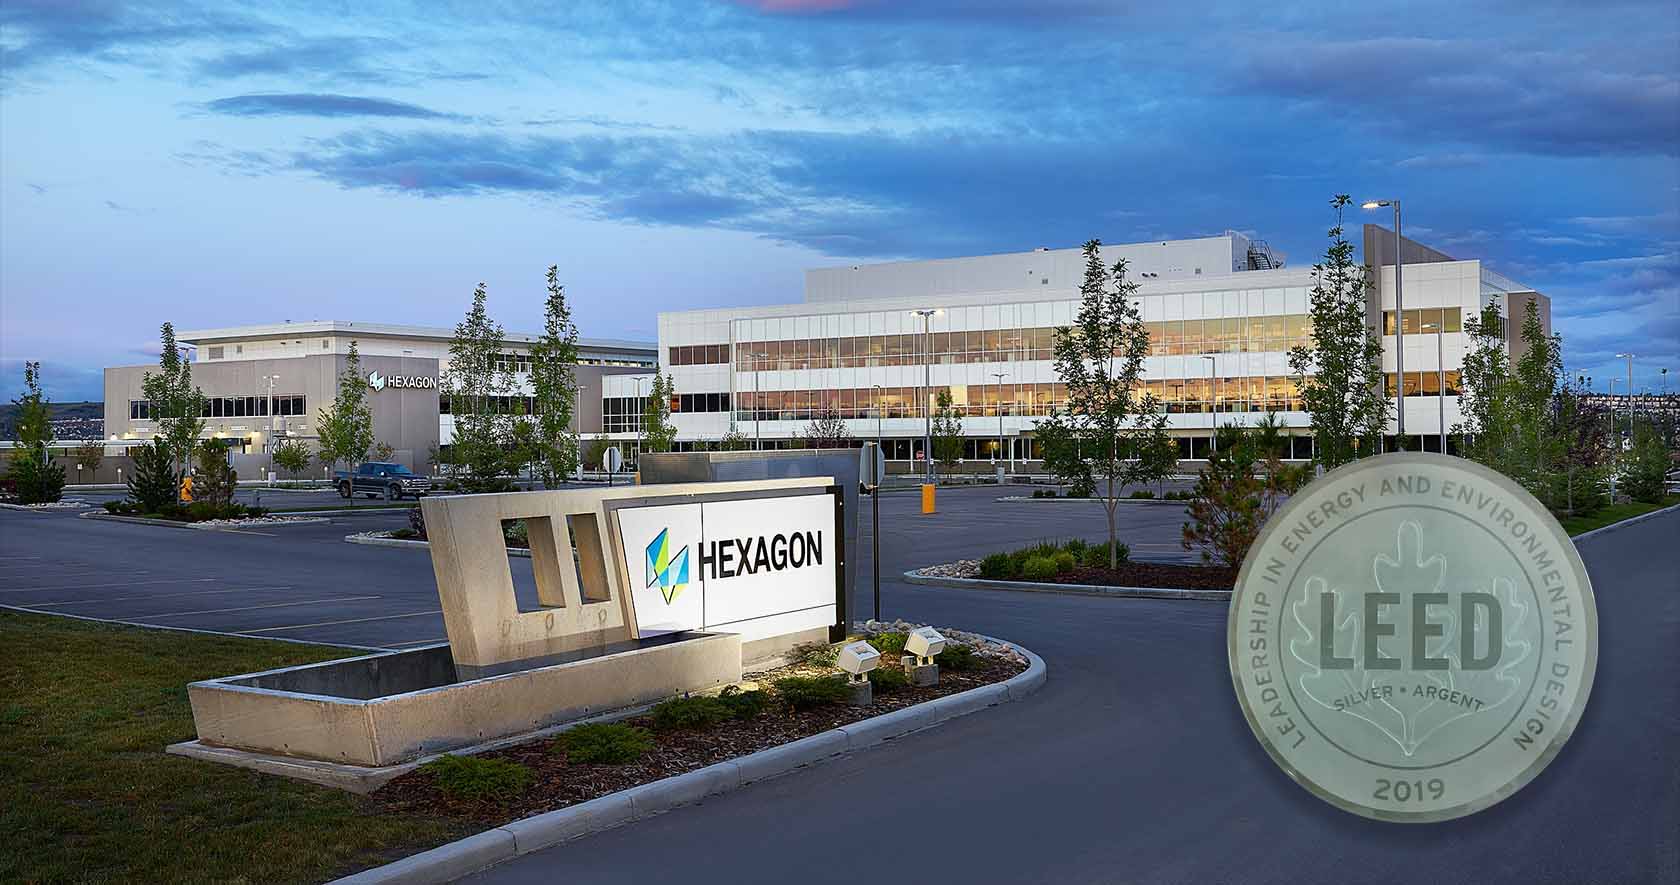 Photo of Hexagon campus with LEED certification seal